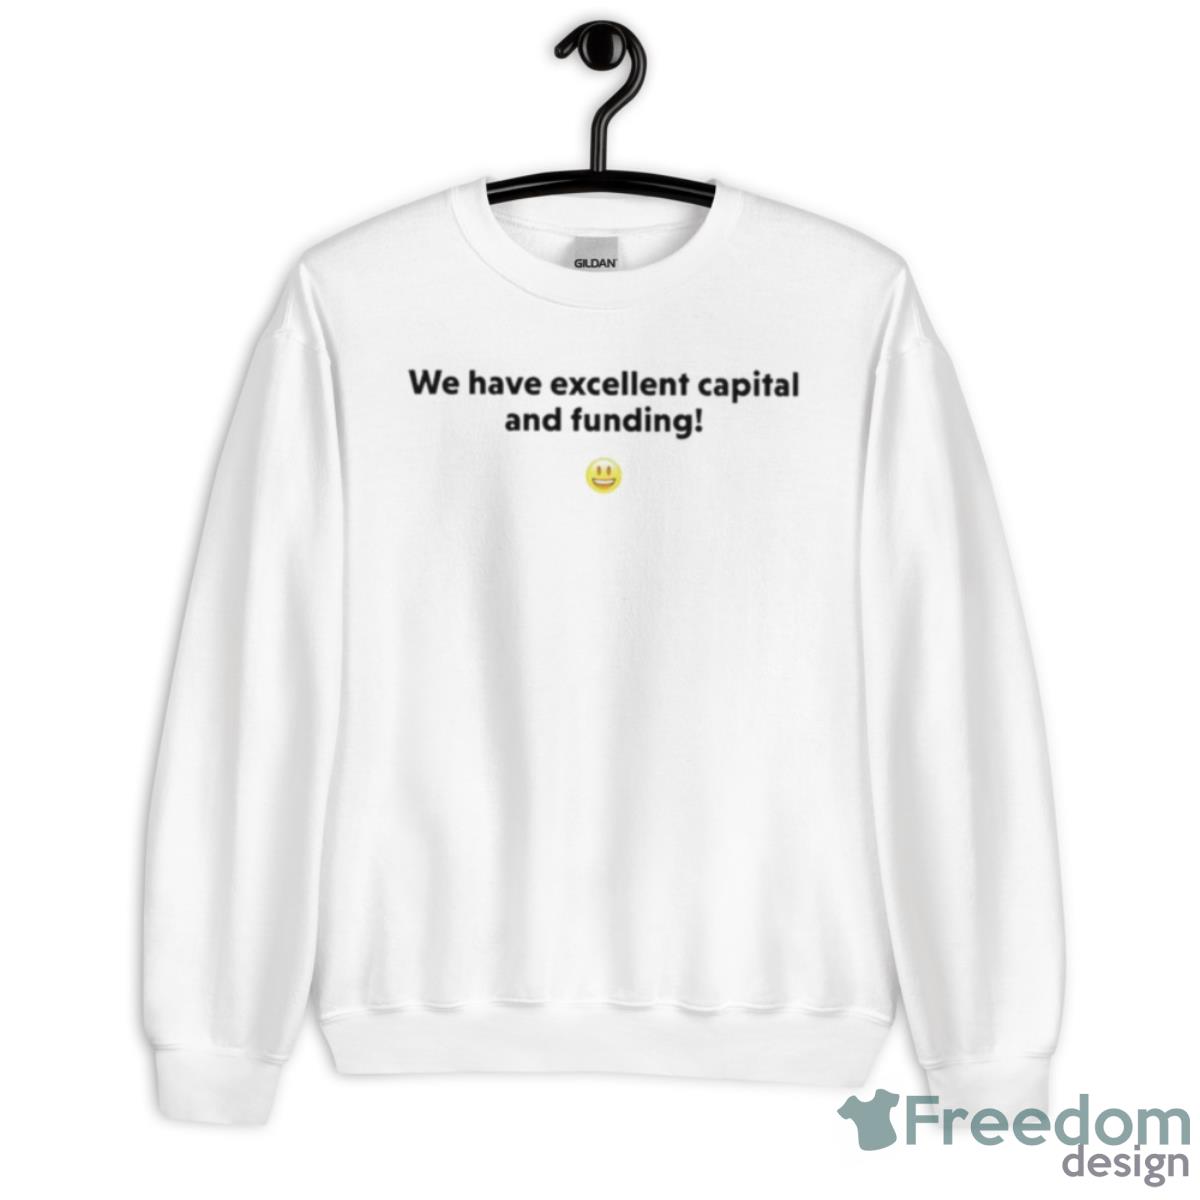 We Have Excellent Capital And Funding Shirt